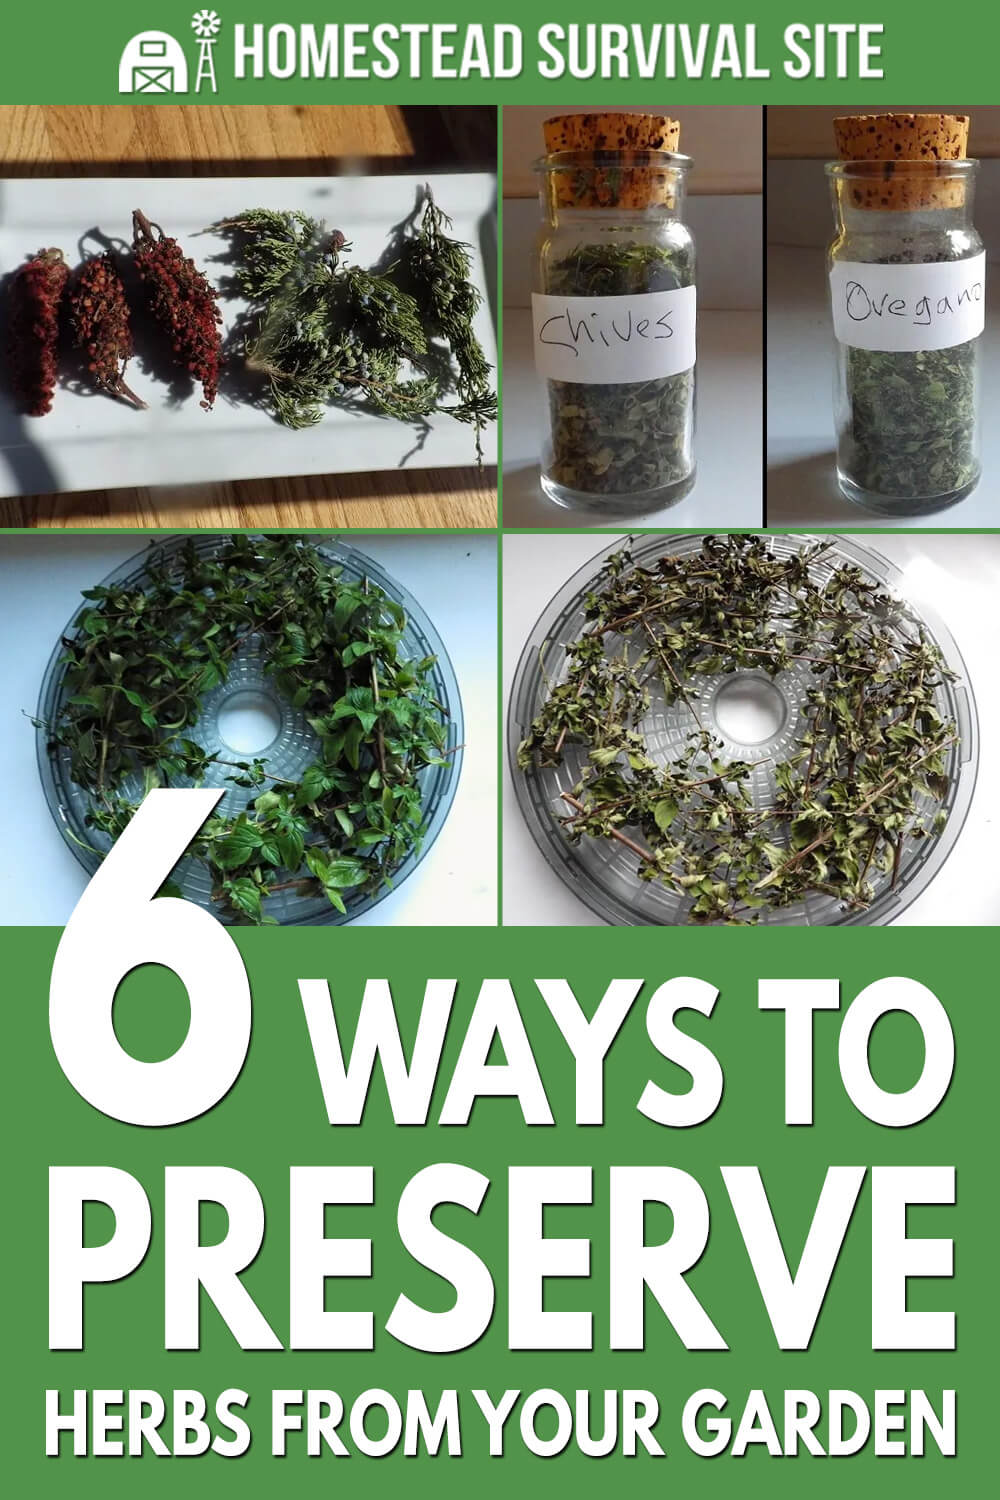 6 Ways To Preserve Herbs From Your Garden